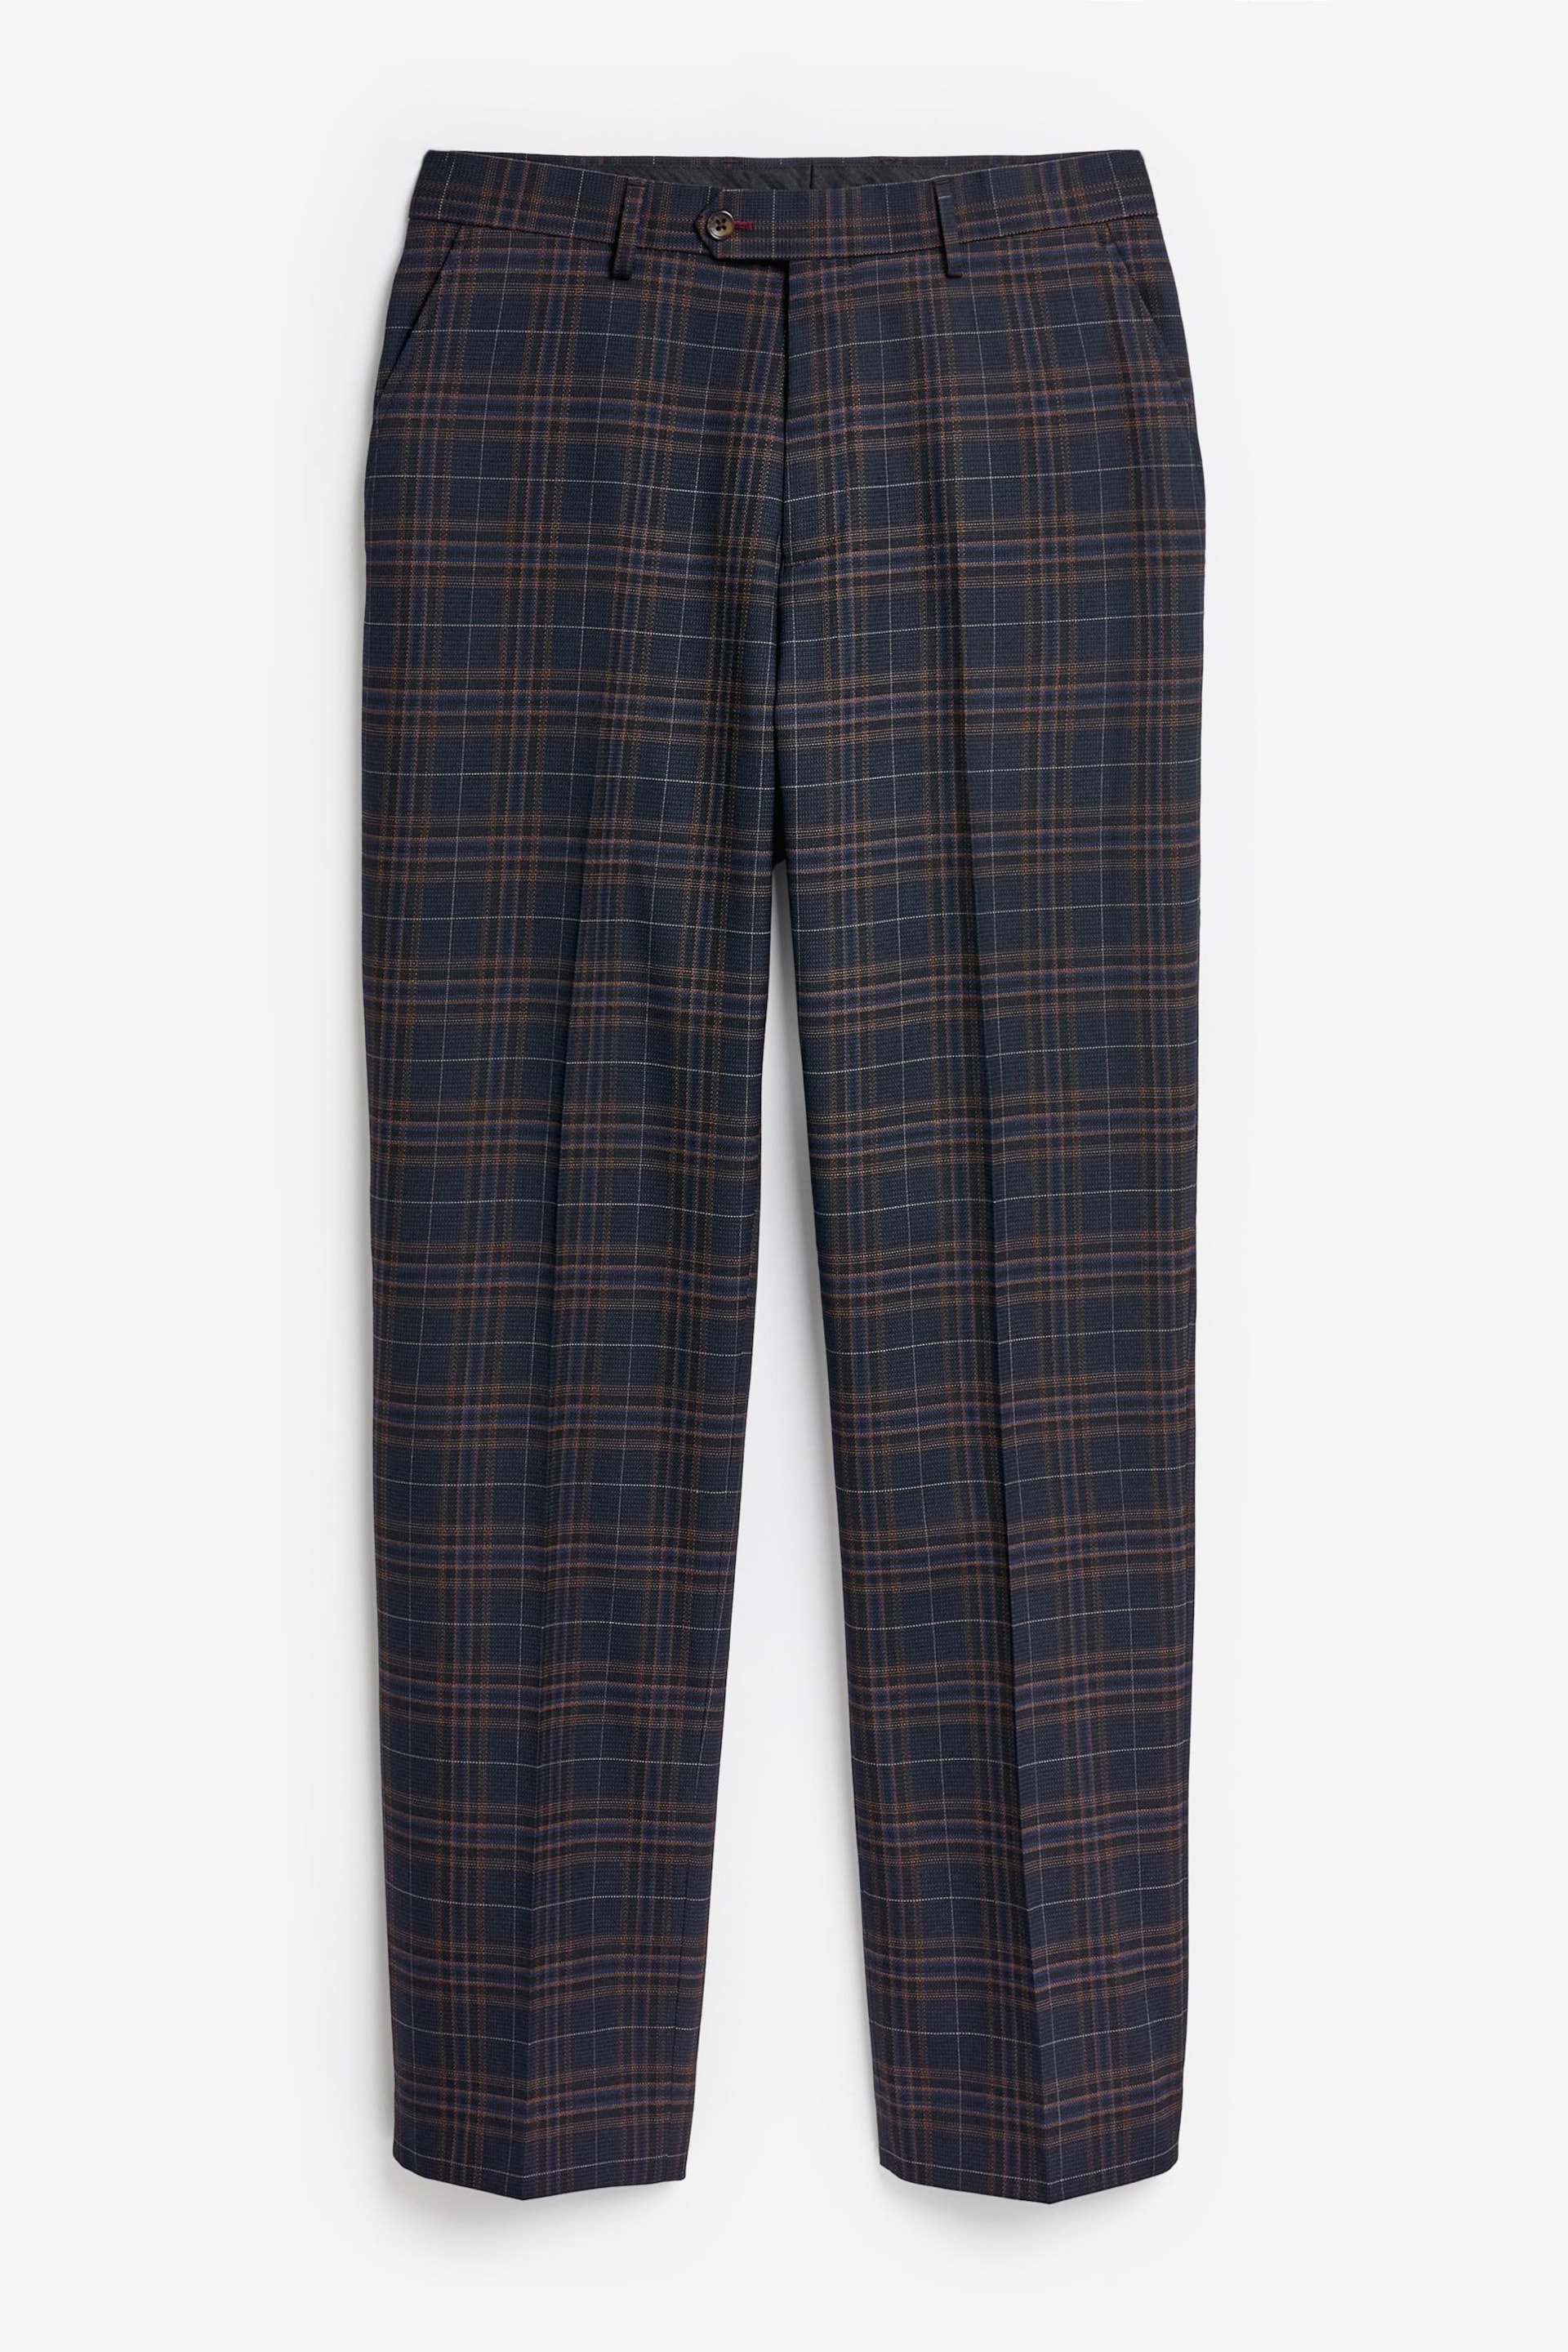 Navy Tailored Fit Trimmed Check Suit Trousers - Image 6 of 9